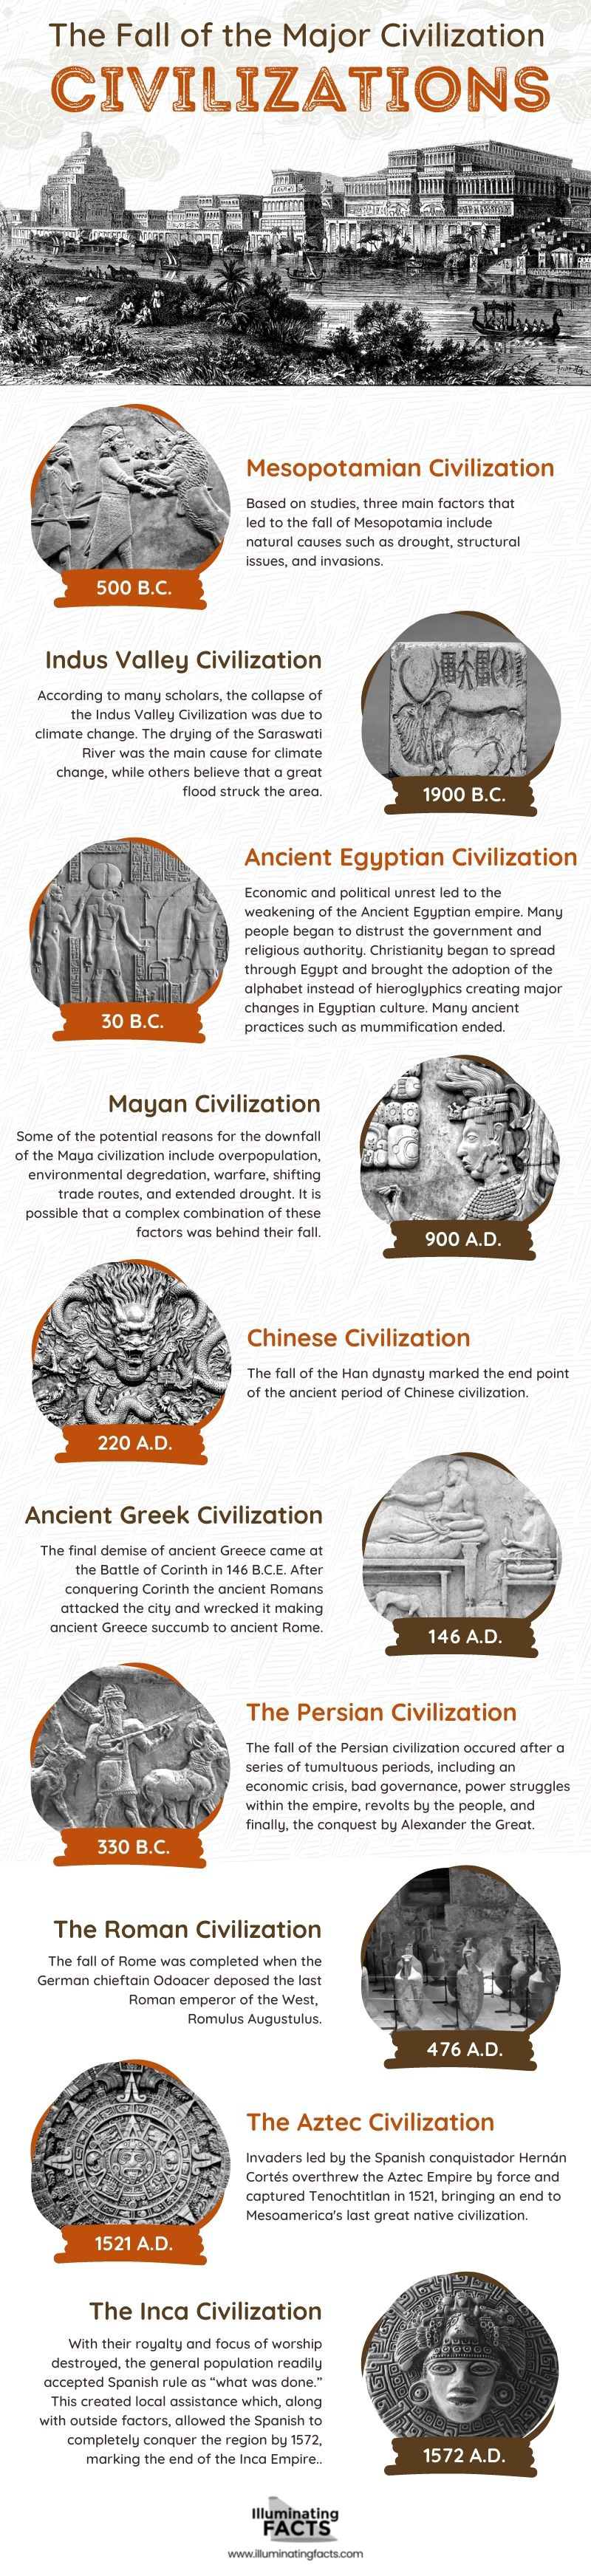 THE FALL OF THE MAJOR CIVILIZATIONS